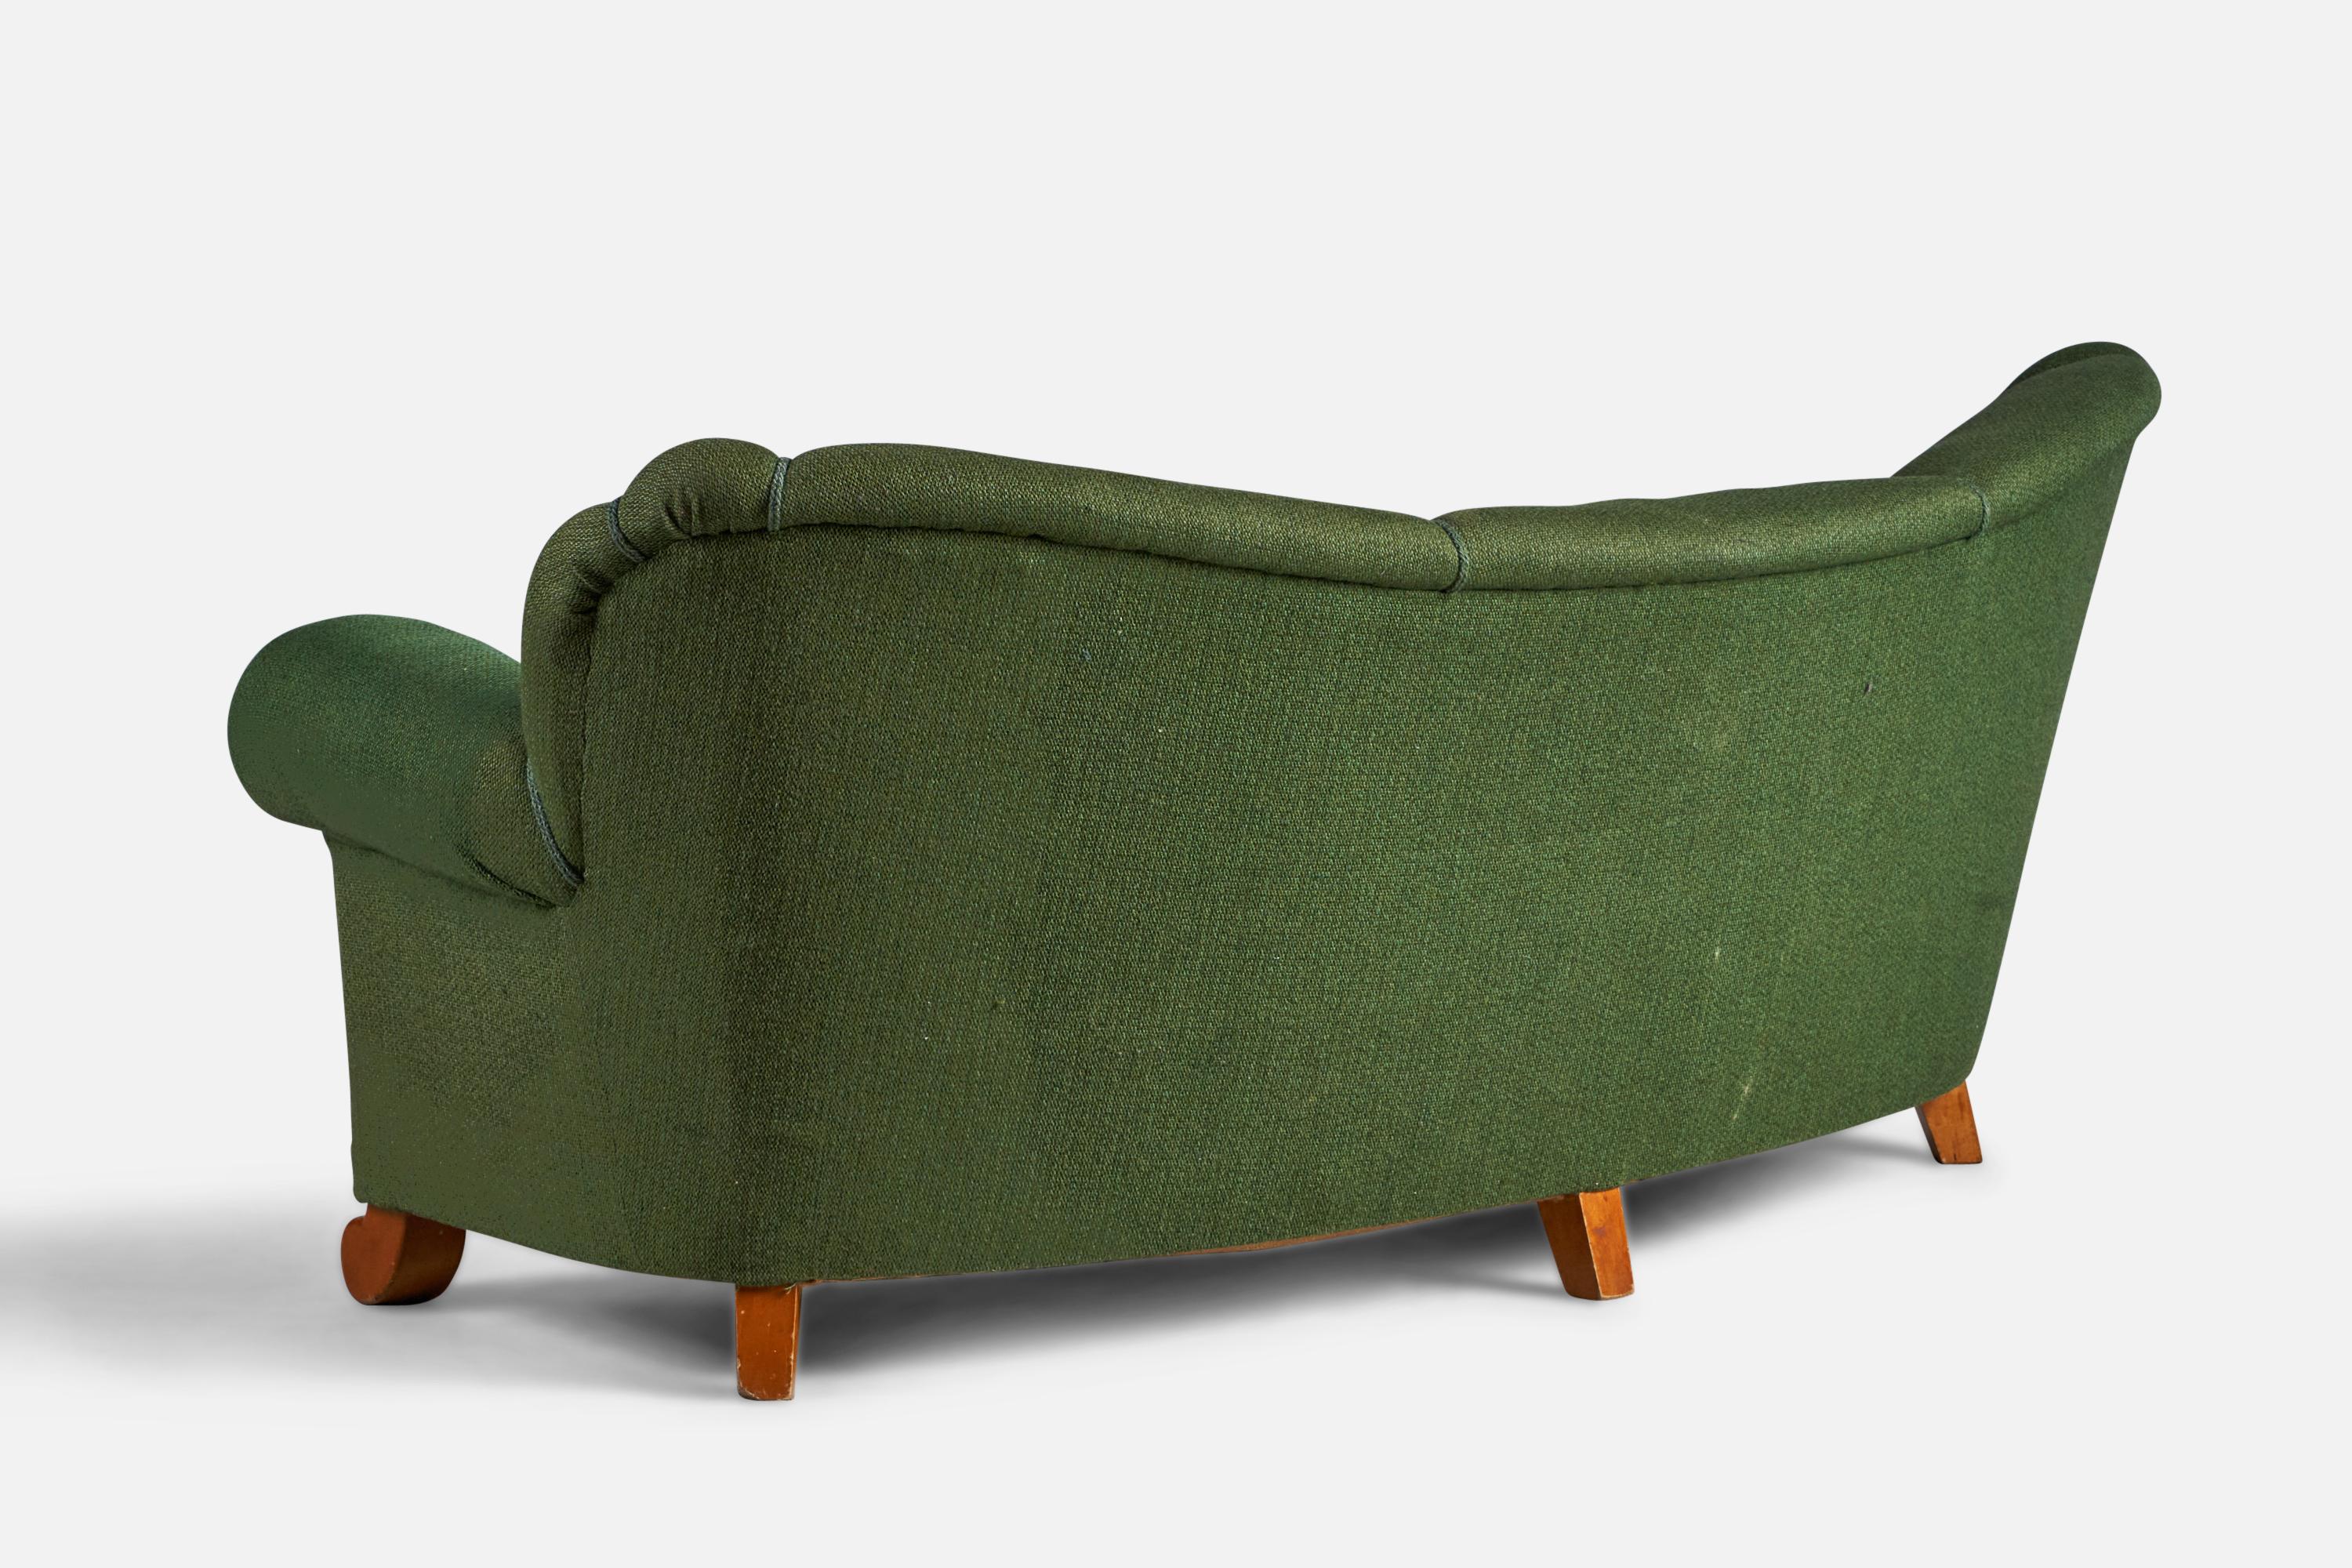 Tor Wolfenstein, Curved Sofa, Fabric, Wood, Sweden, 1940s In Good Condition For Sale In High Point, NC